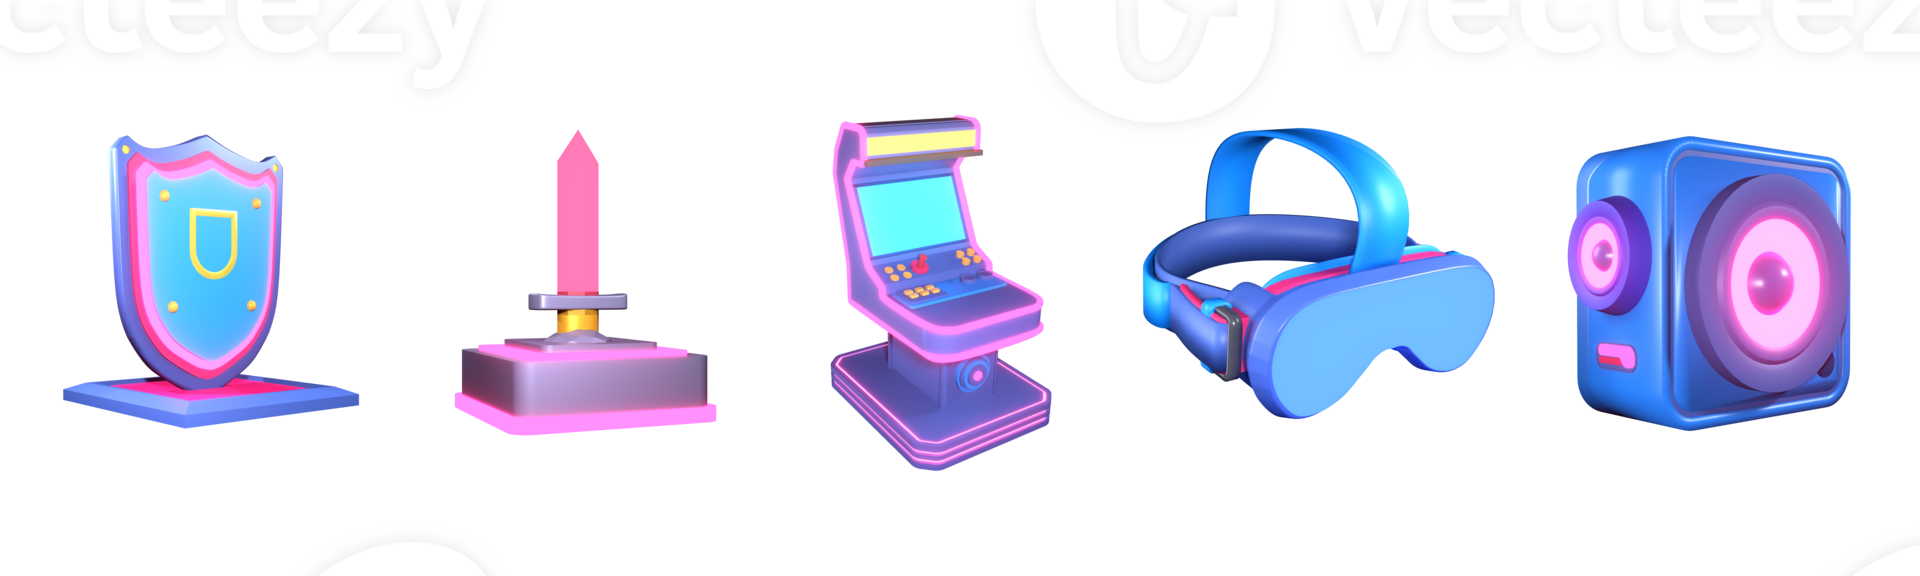 3D icon video games collection rendered isolated on the transparent background. shield, sword, arcade machine, virtual reality headset, and speaker object for your design. png